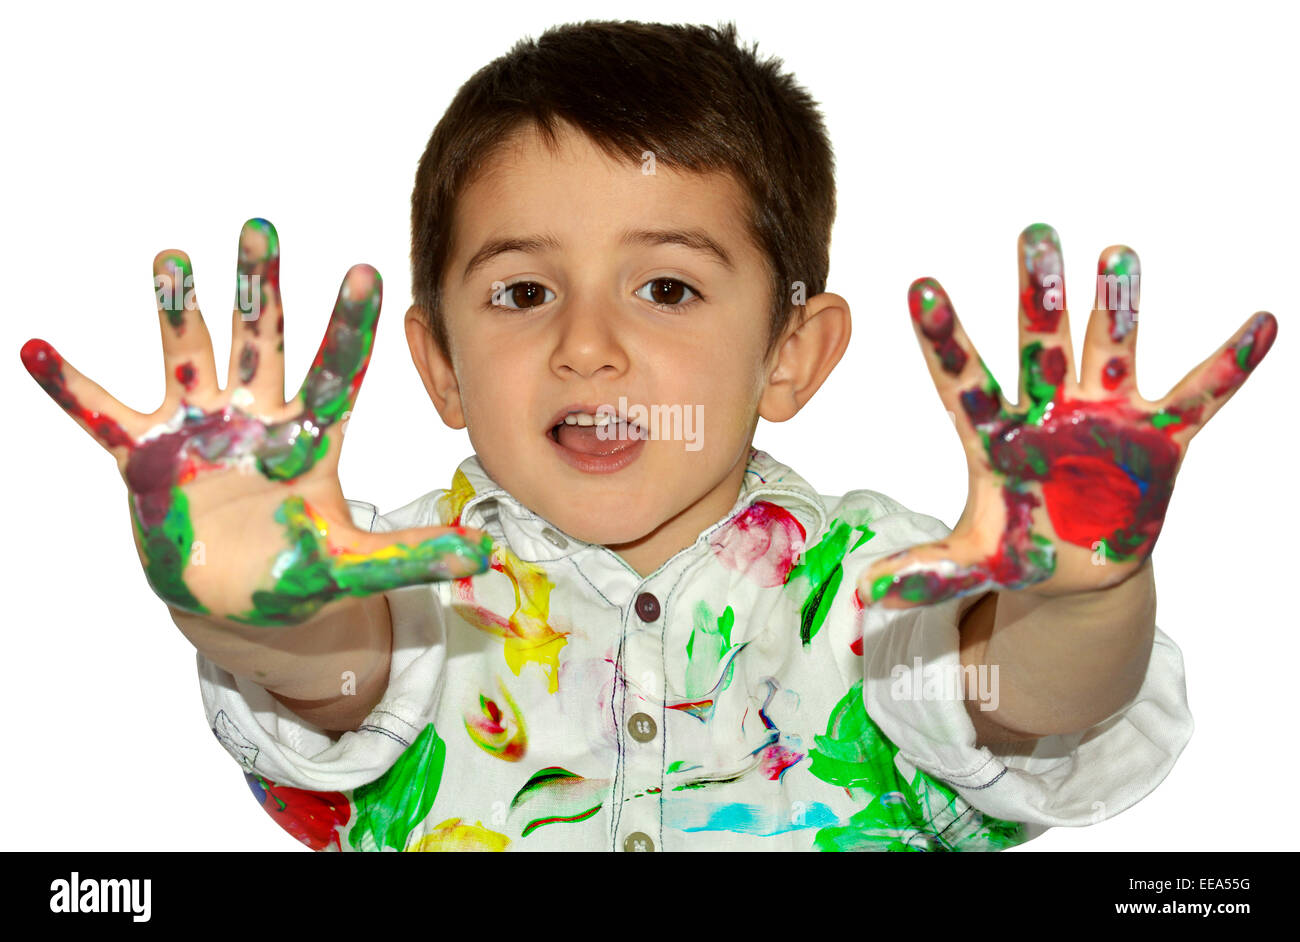 Little boy painting with hands with different color paint on his palms Stock Photo